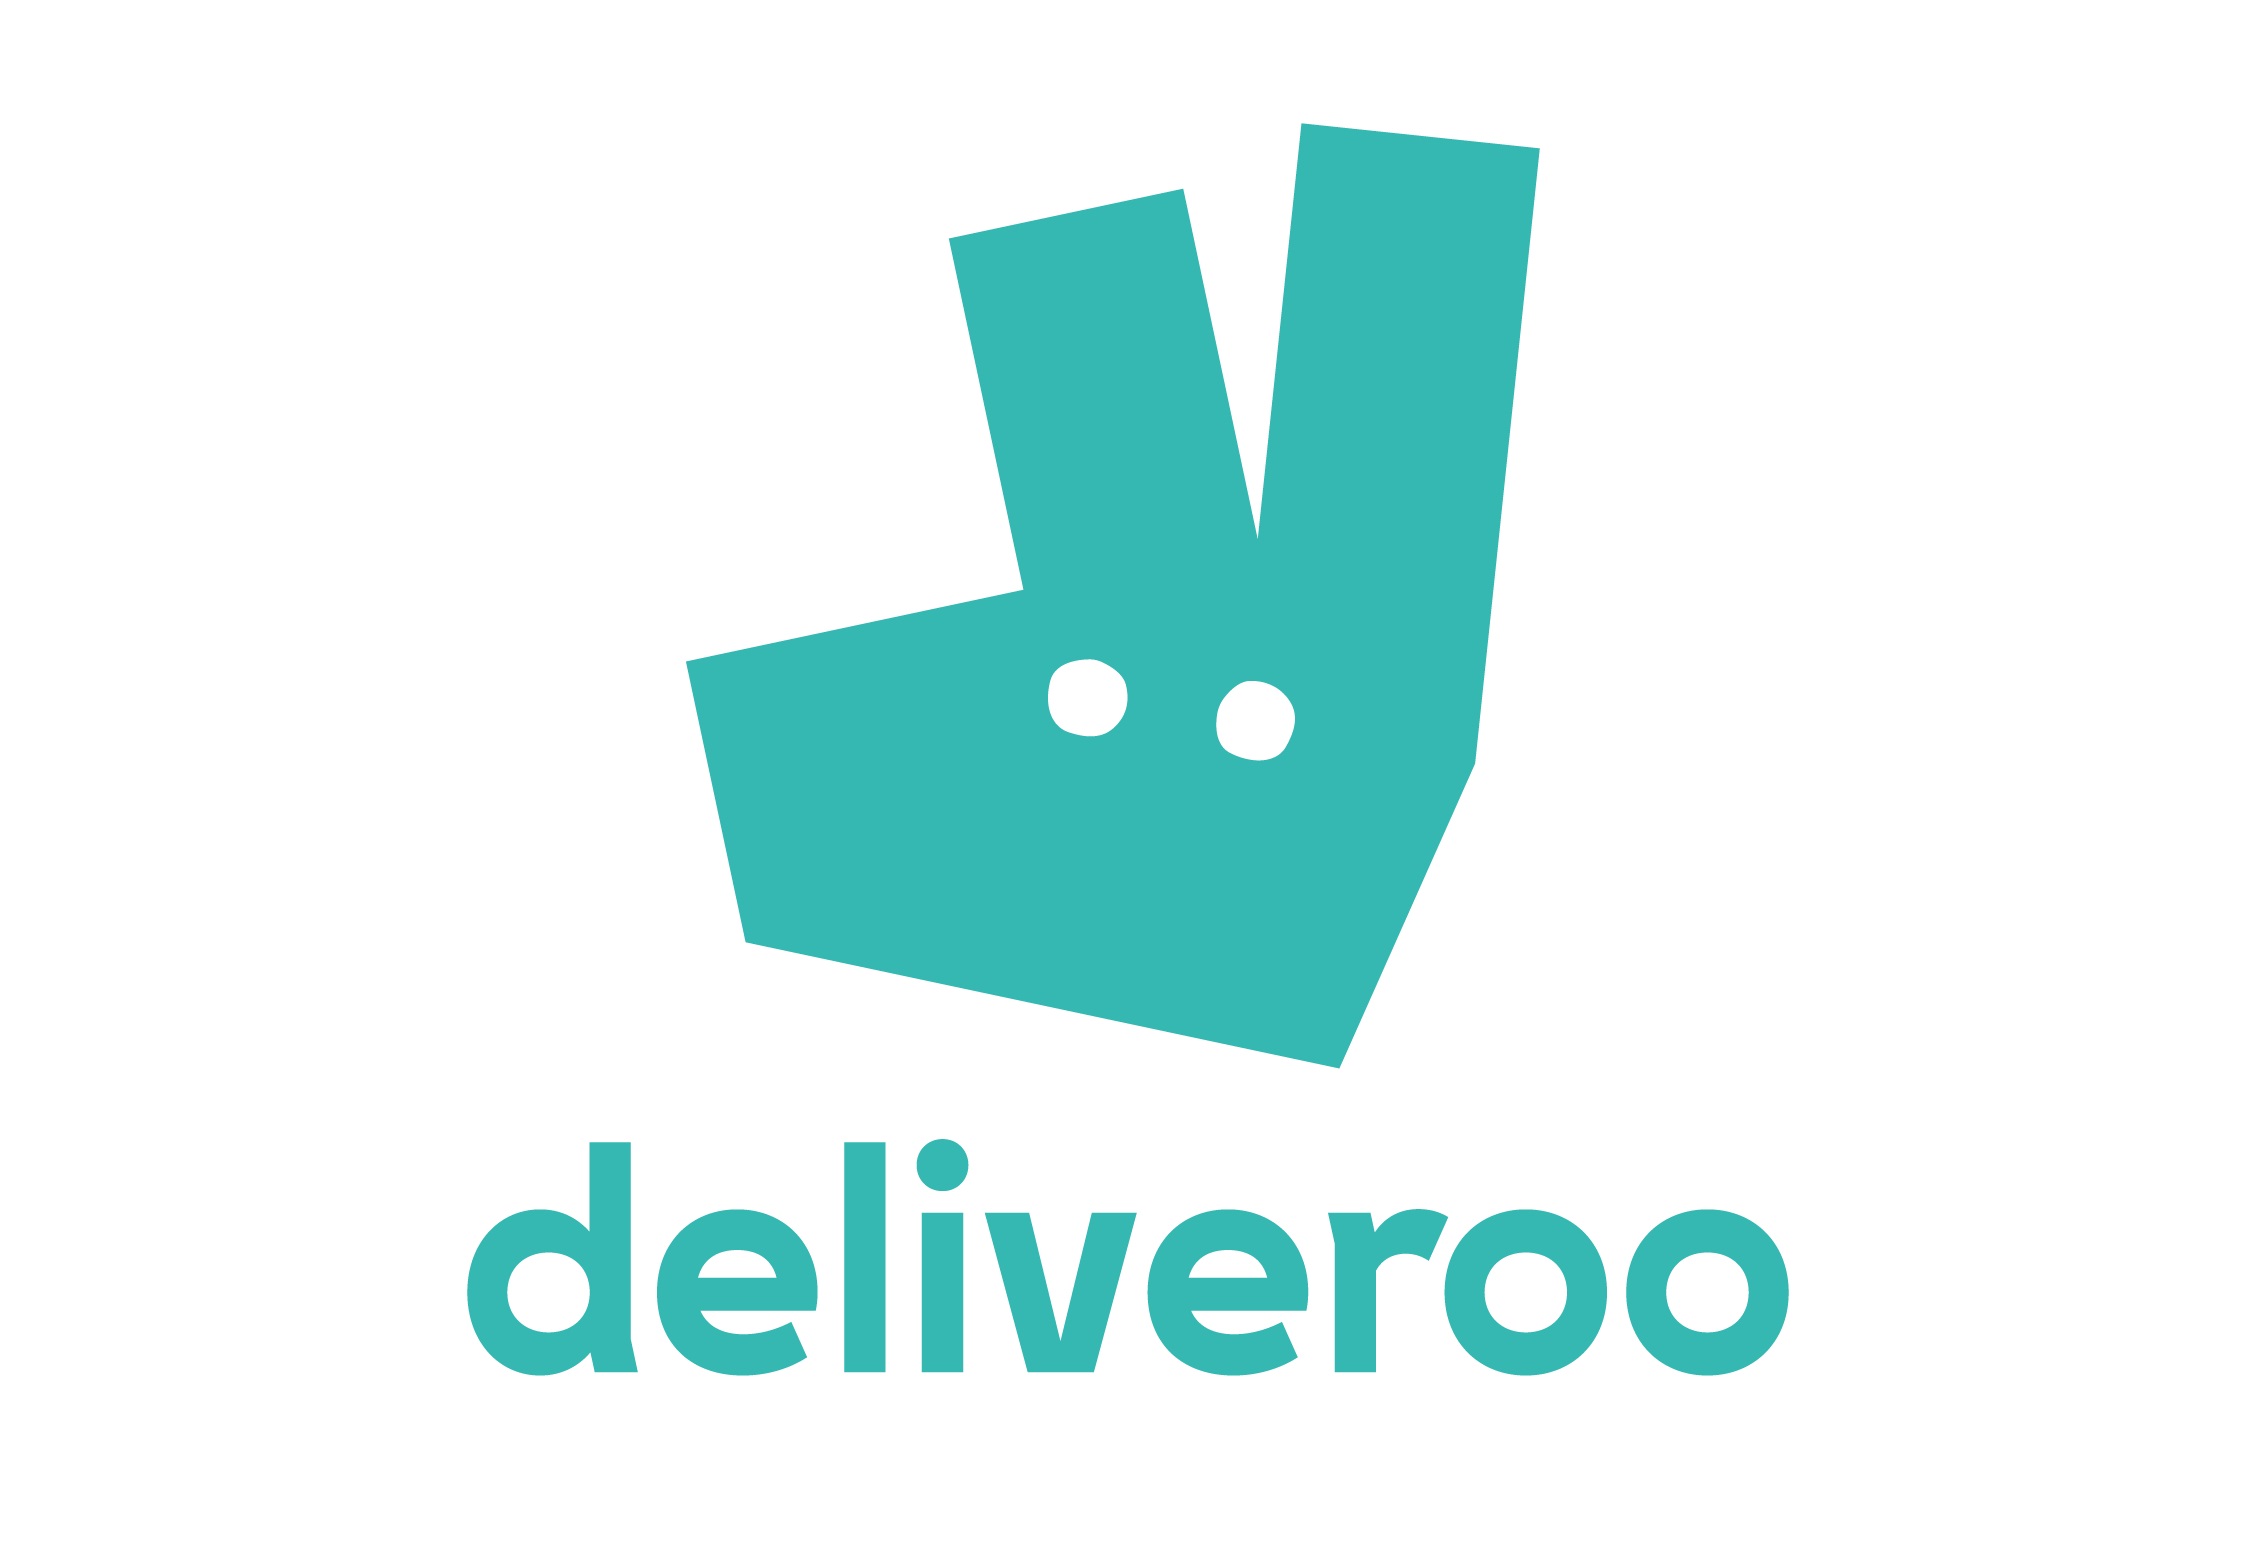 Deliveroo Coupons & Promo Codes